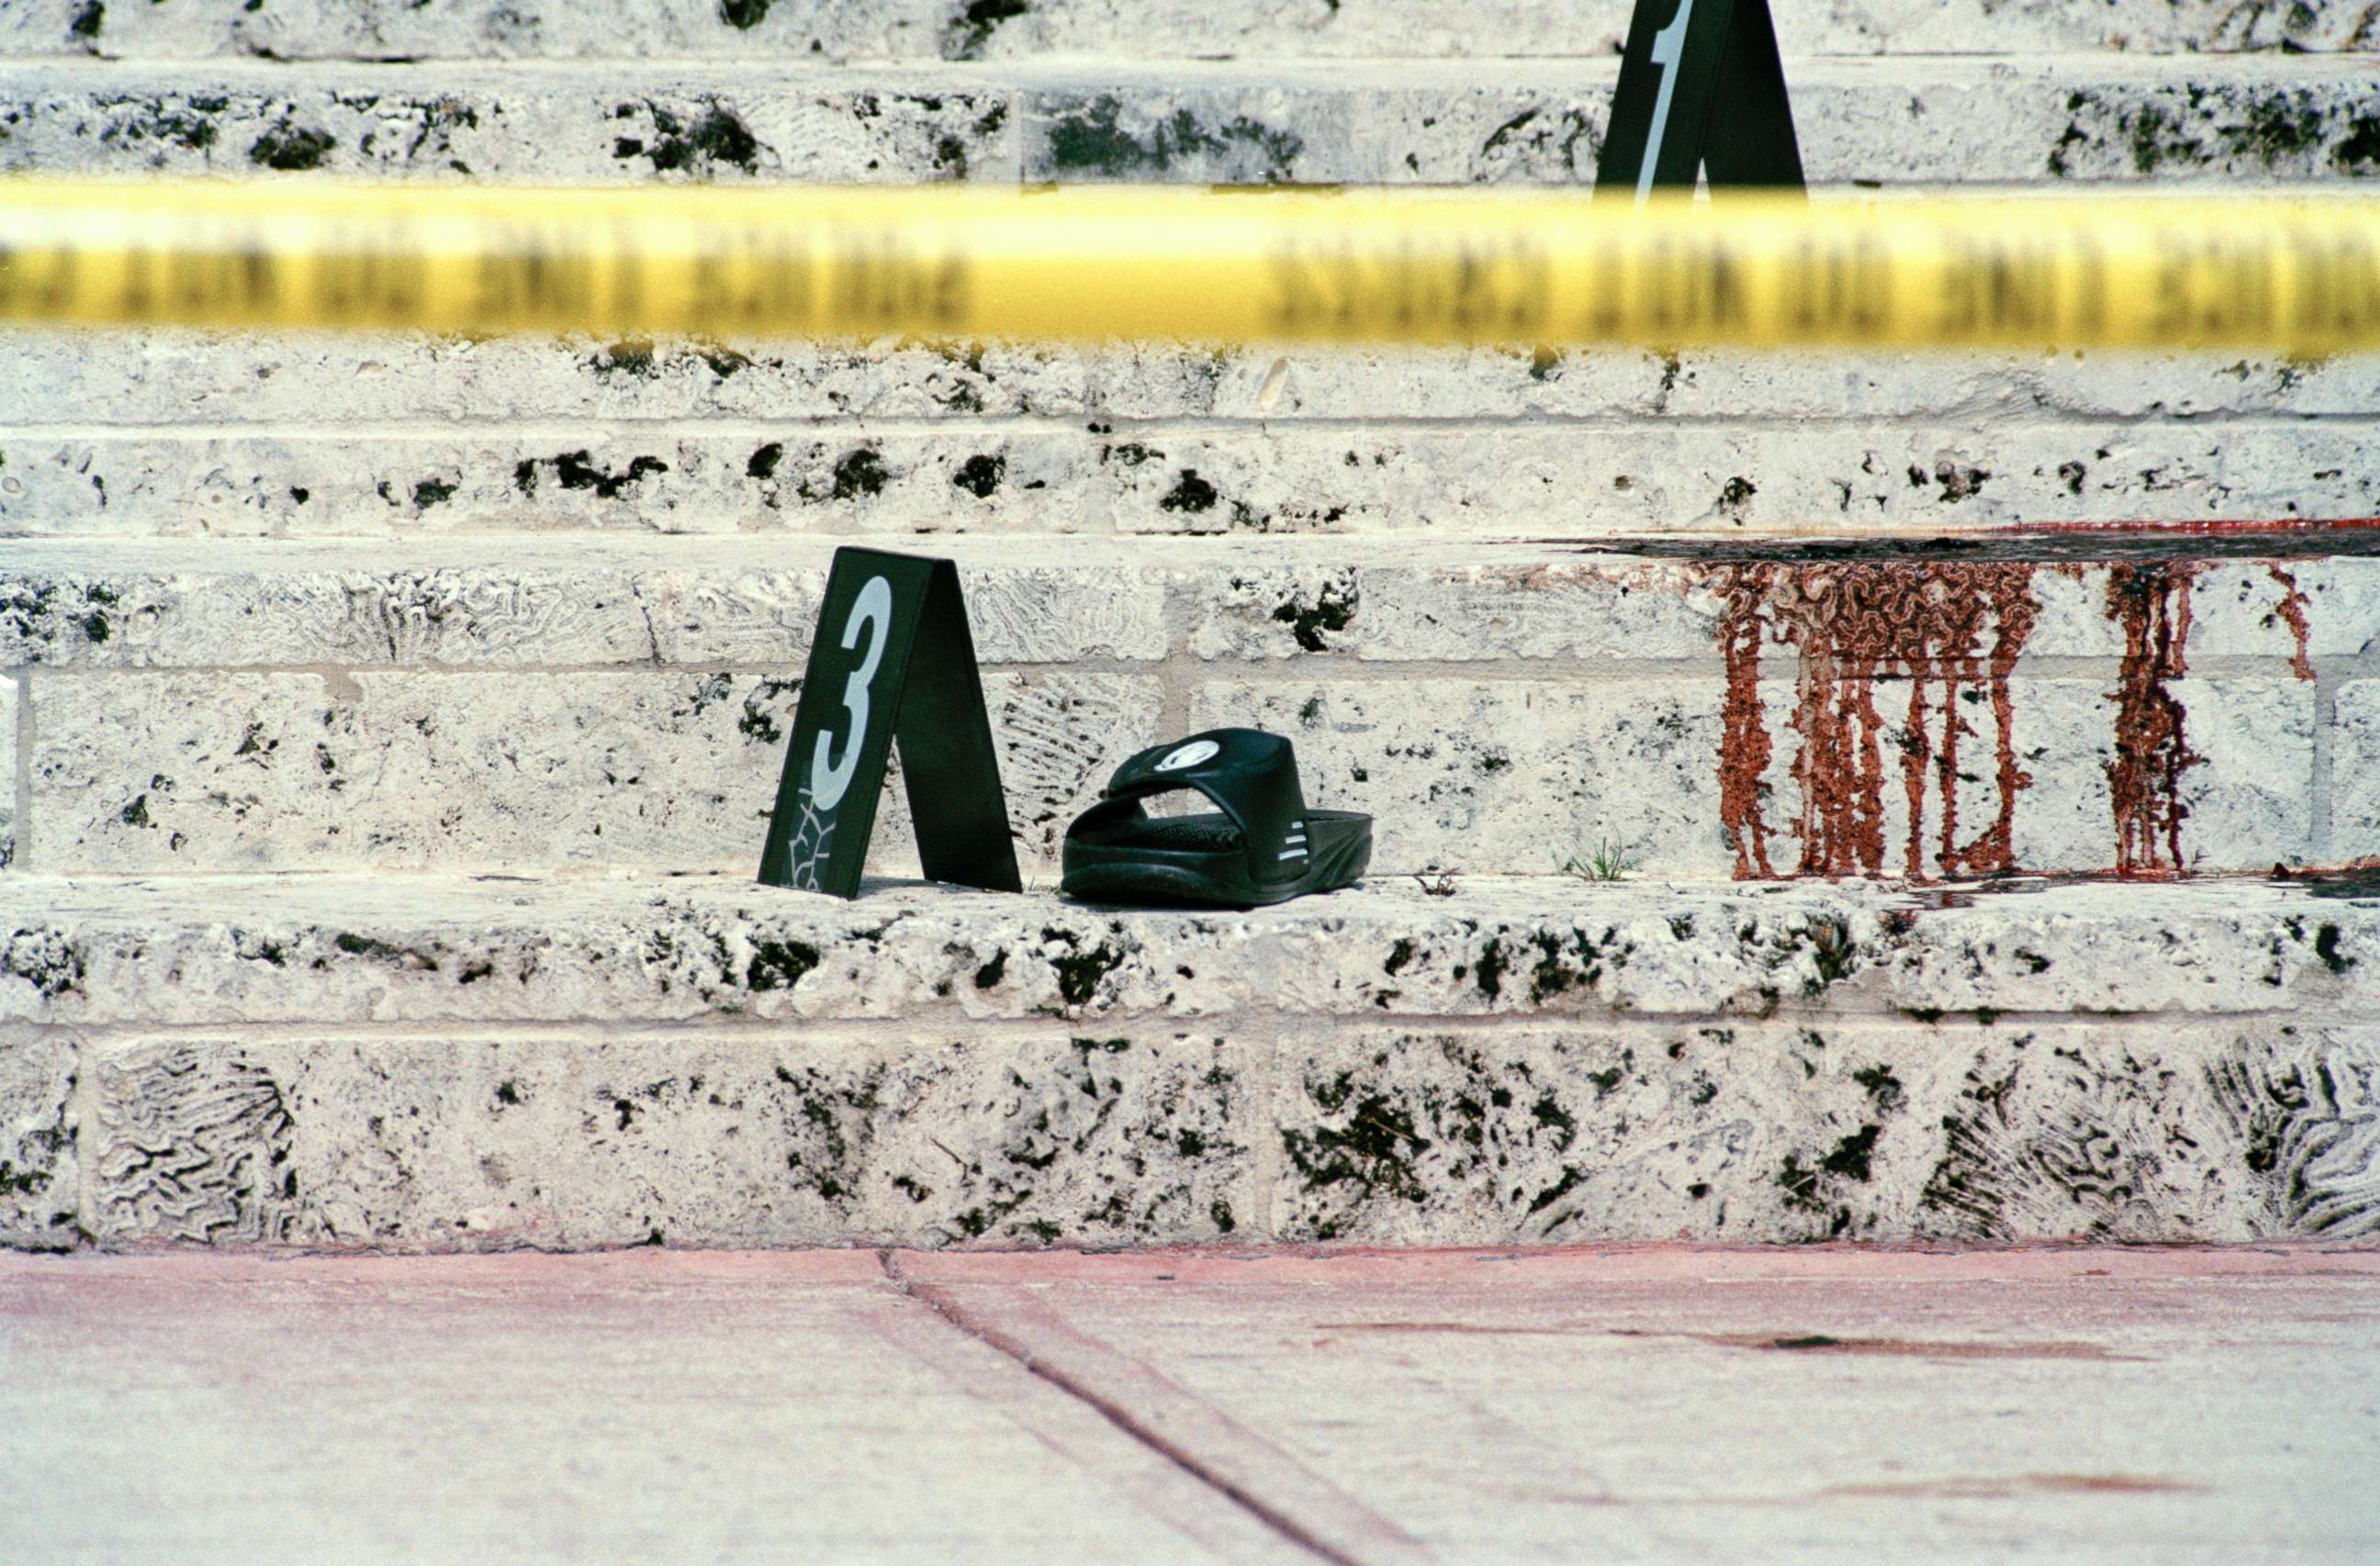 PHOTO: The steps of the Miami Beach home of Italian fashion designer Gianni Versace, shortly after his murder, July 15, 1997.